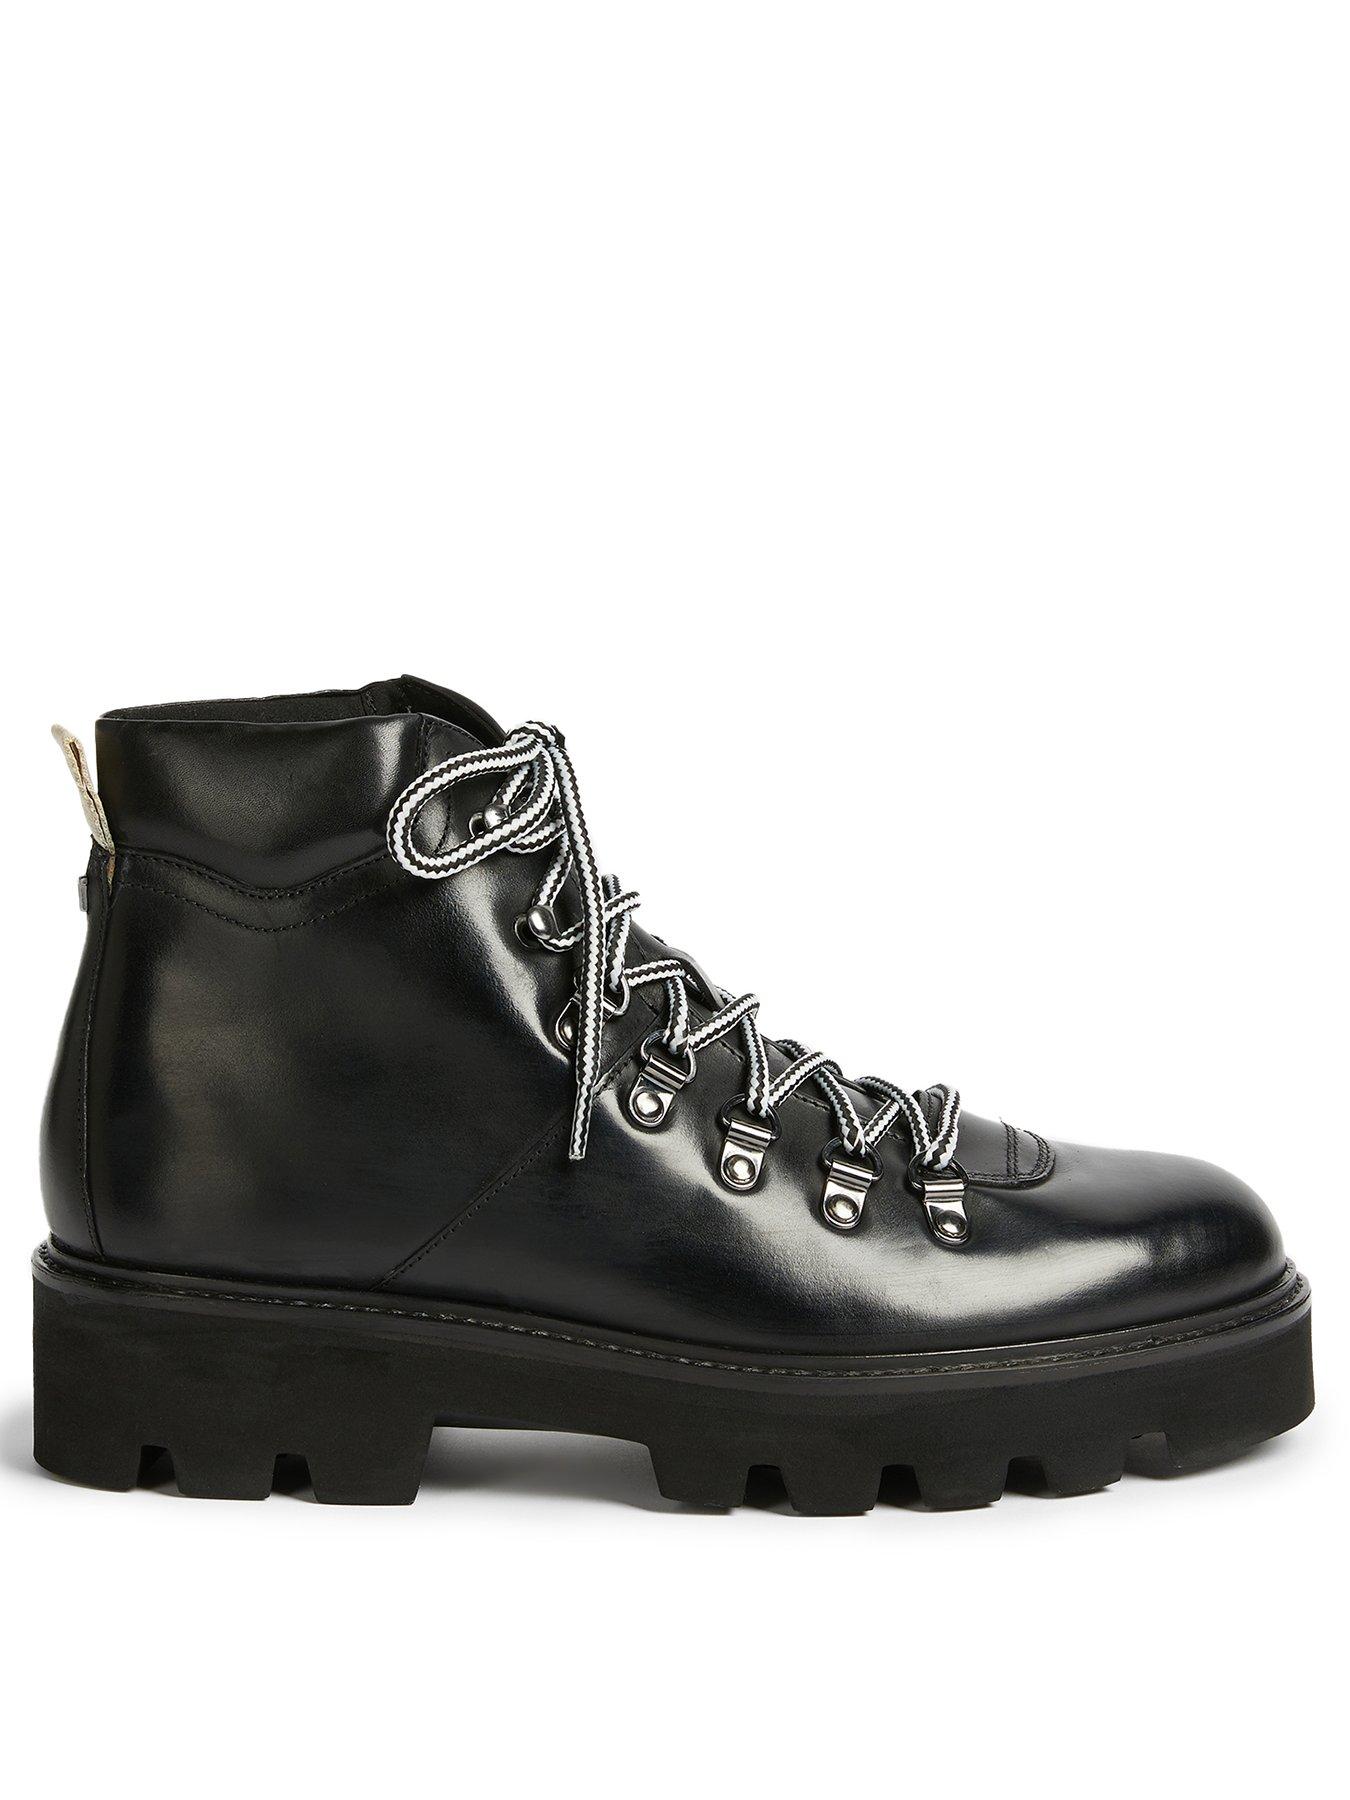 Shoes & boots Ammella Leather Hiker Boot - Black